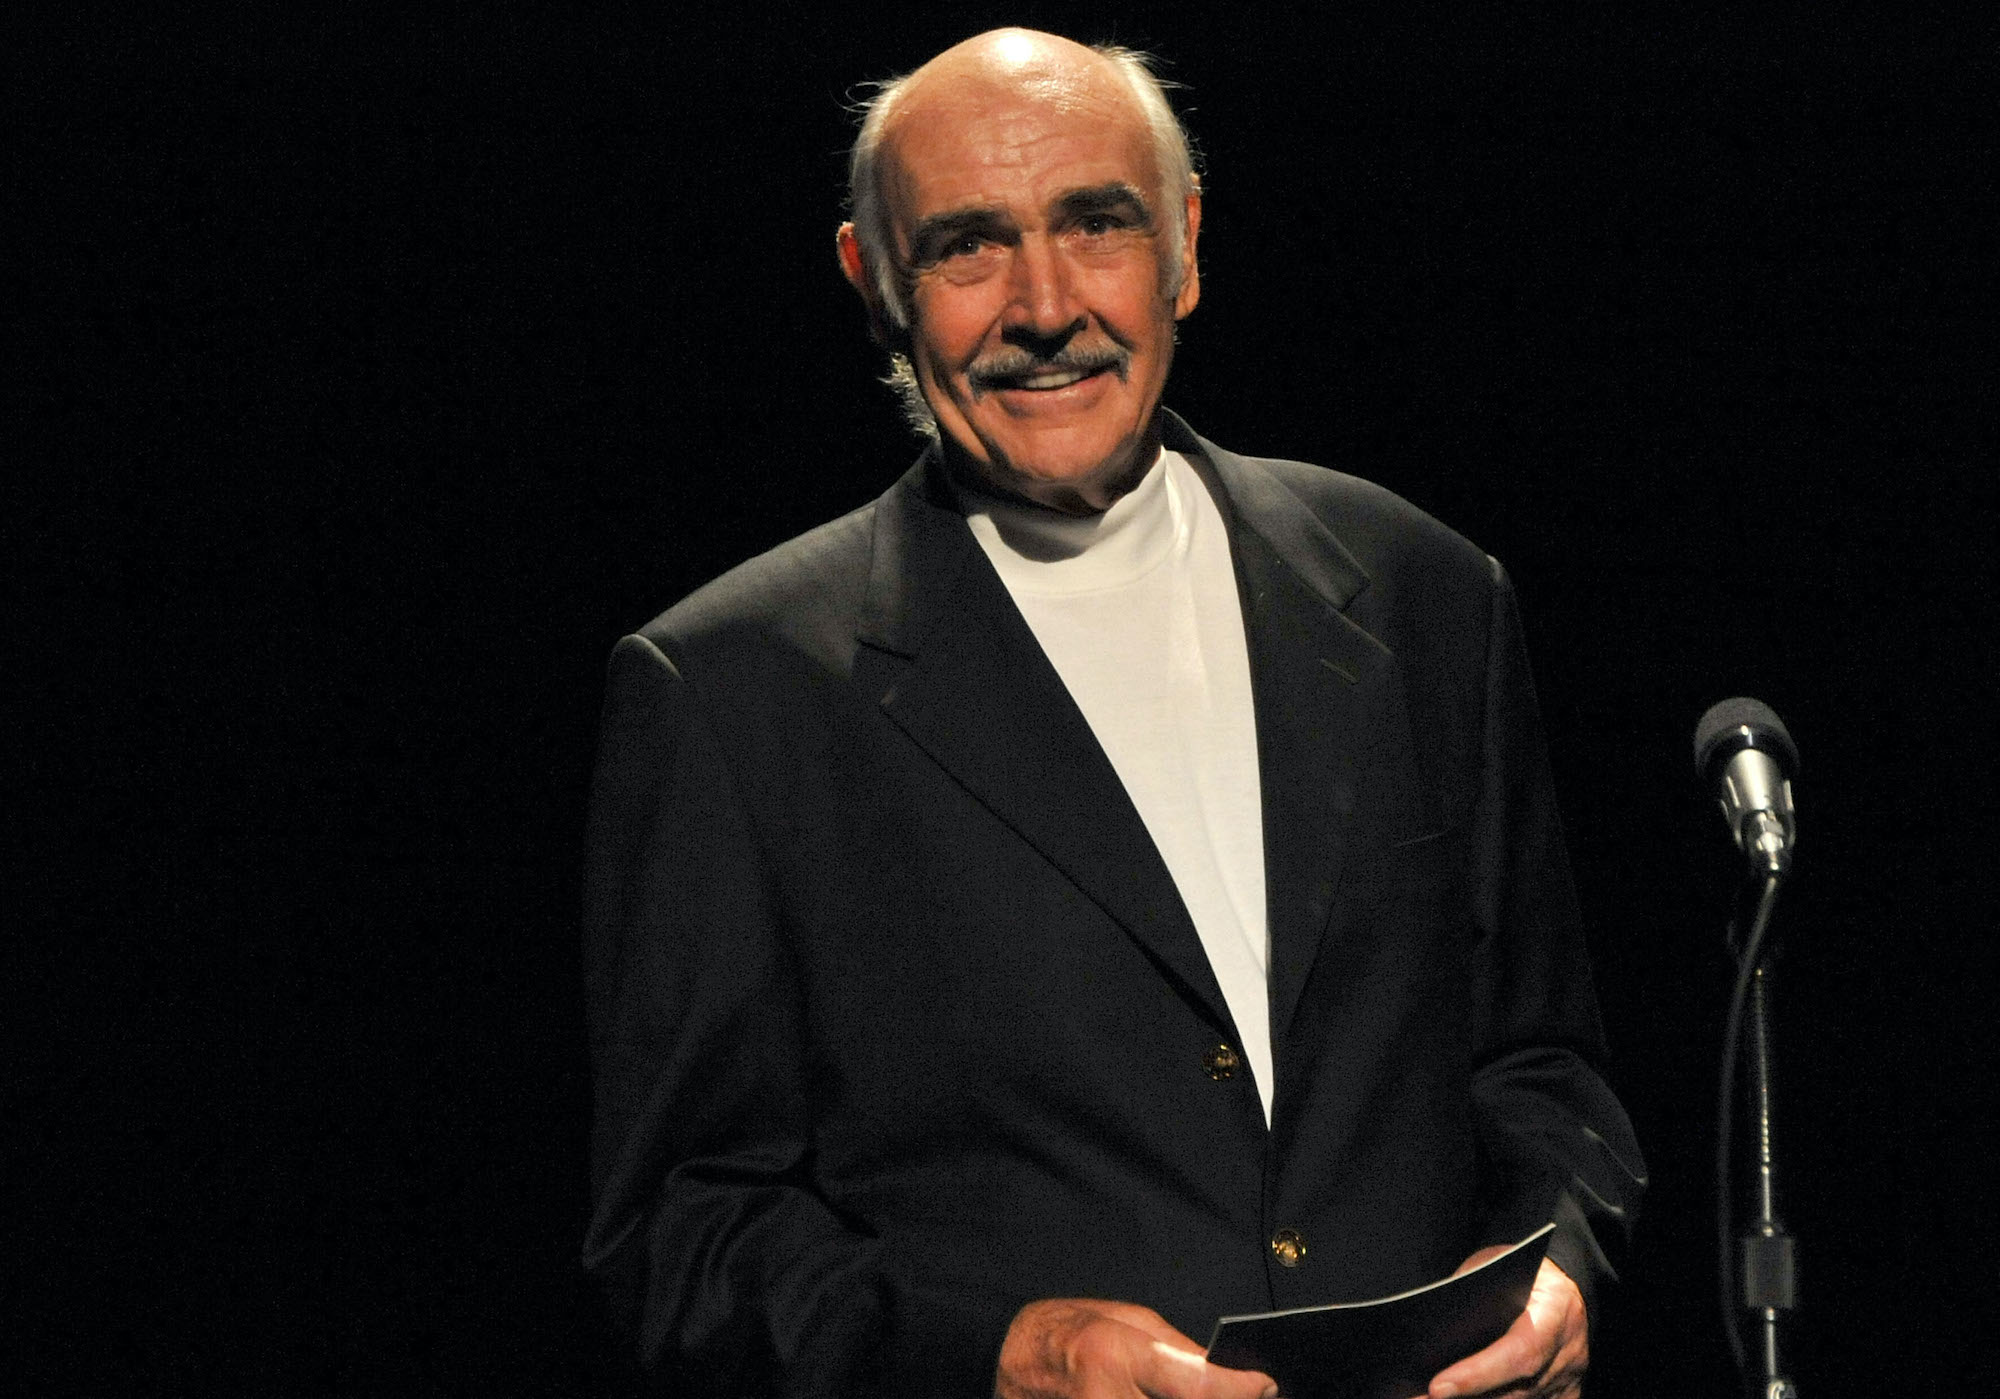 Sean Connery smiling behind a microphone in front of a black background